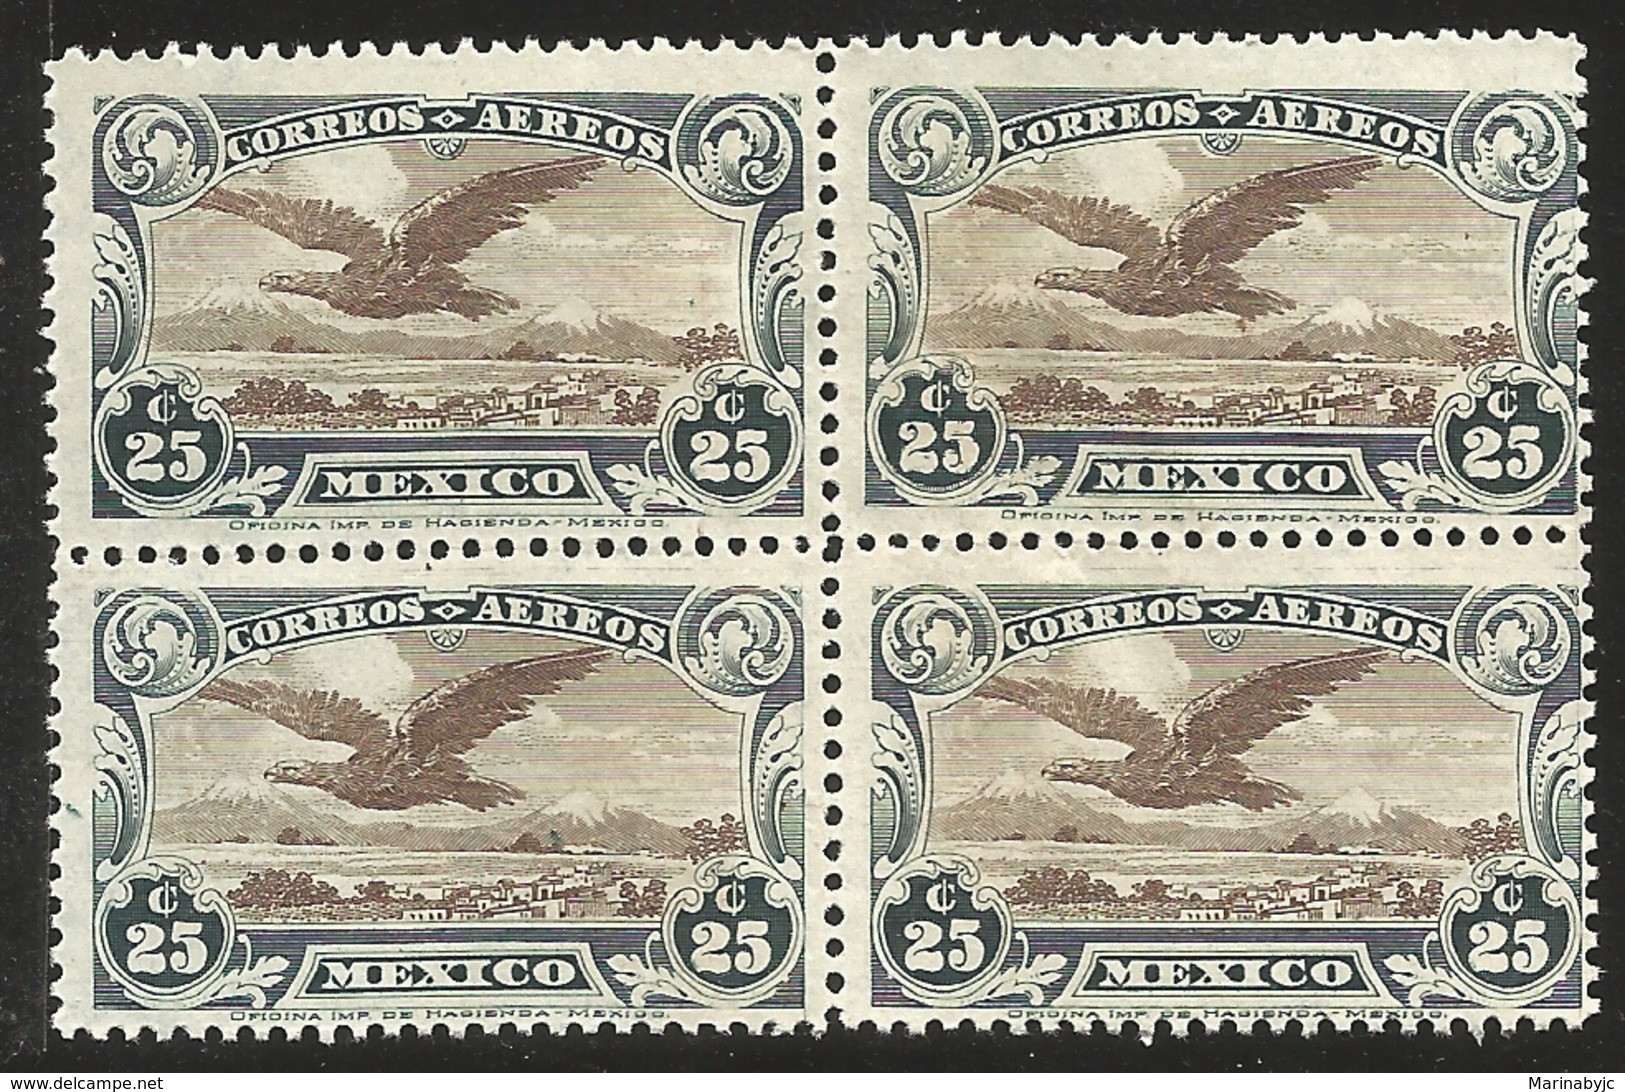 RJ) 1928 MEXICO, BLOCK OF 4, EAGLE FLYING OVER MOUNTAINS, SCOTT C4, MNH - Messico